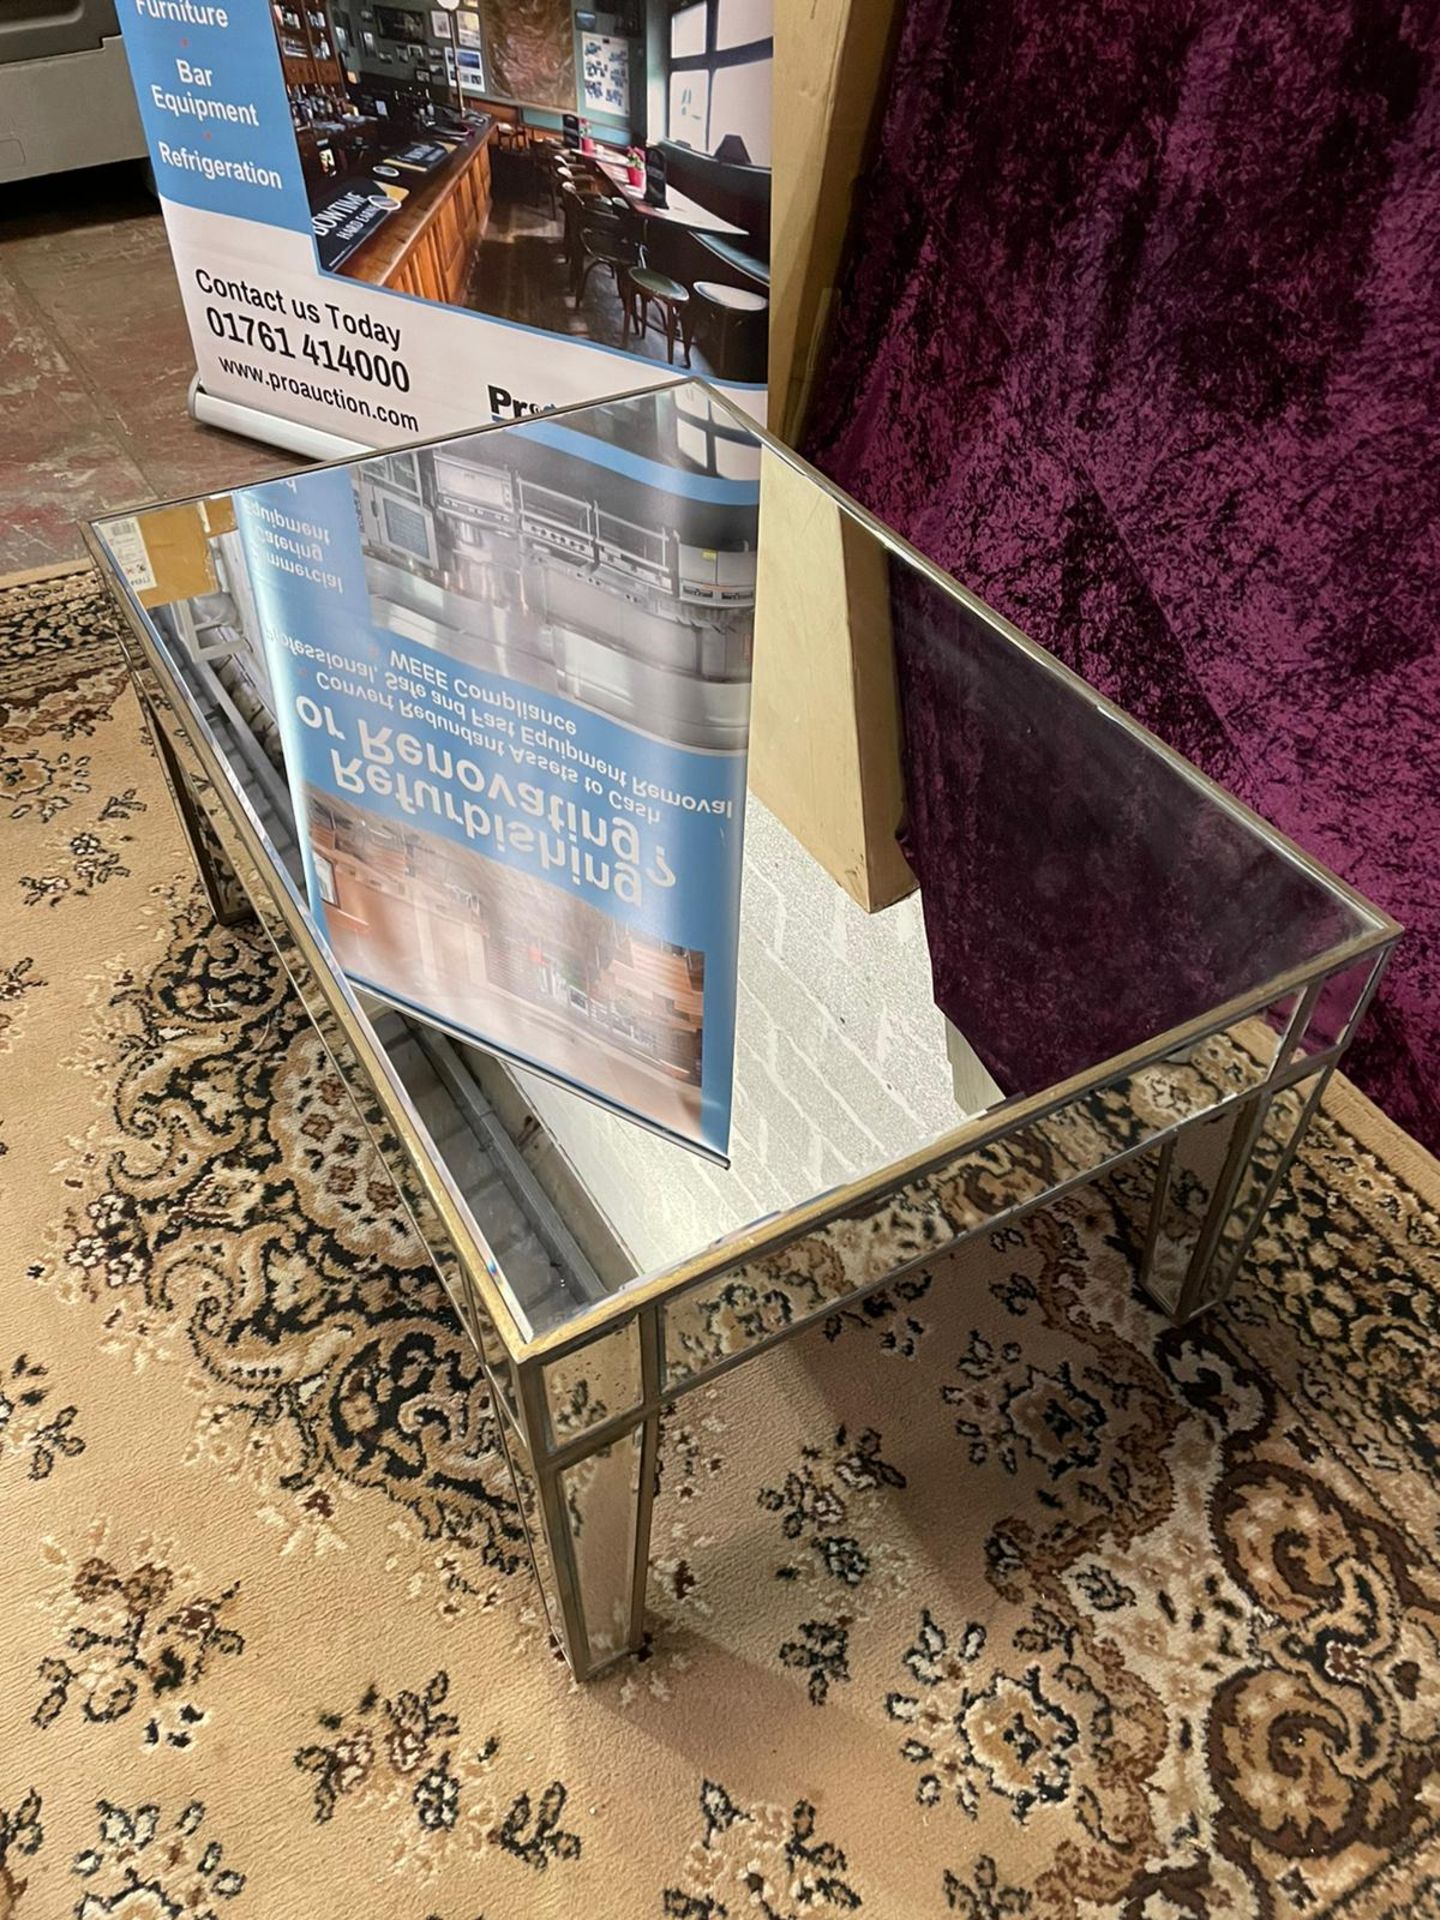 Belfry Mirrored Coffee Table A Fantastic Coffee Table Which Has A Frame With Mirrored Surfaces. It’s